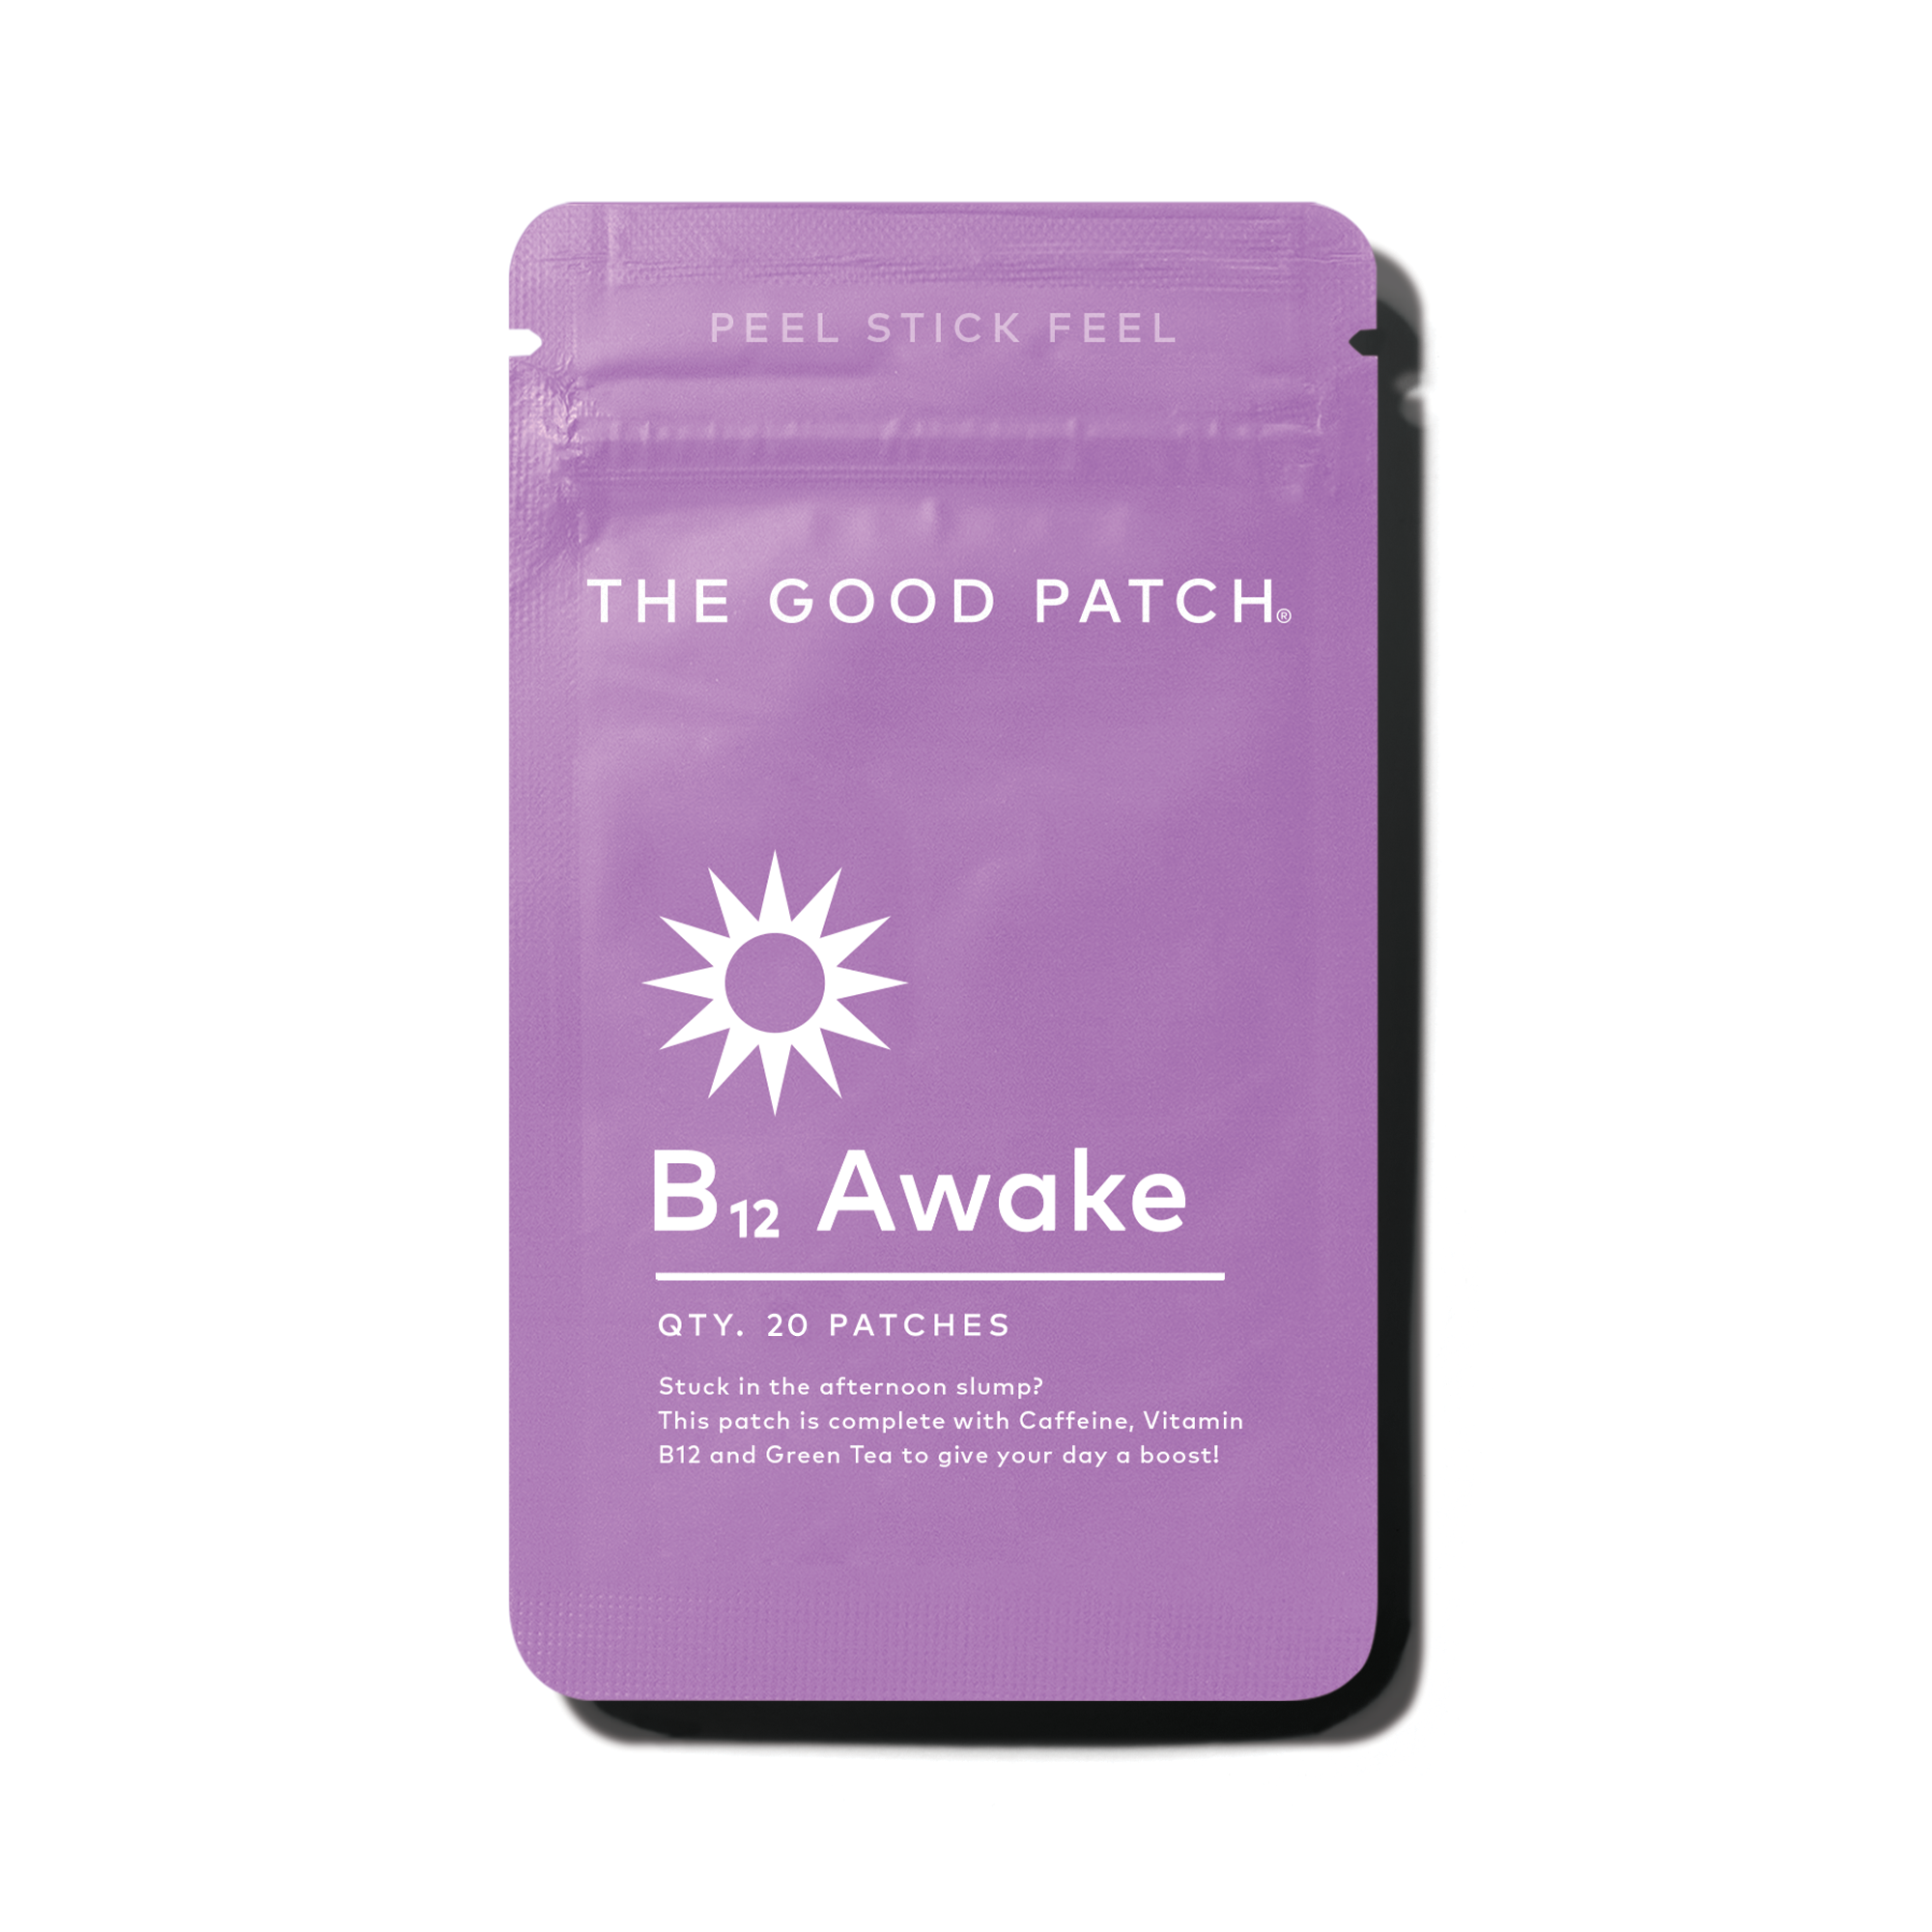 The Patch Brand Energy Patch Gluten Free Skin Vitamin Patches with